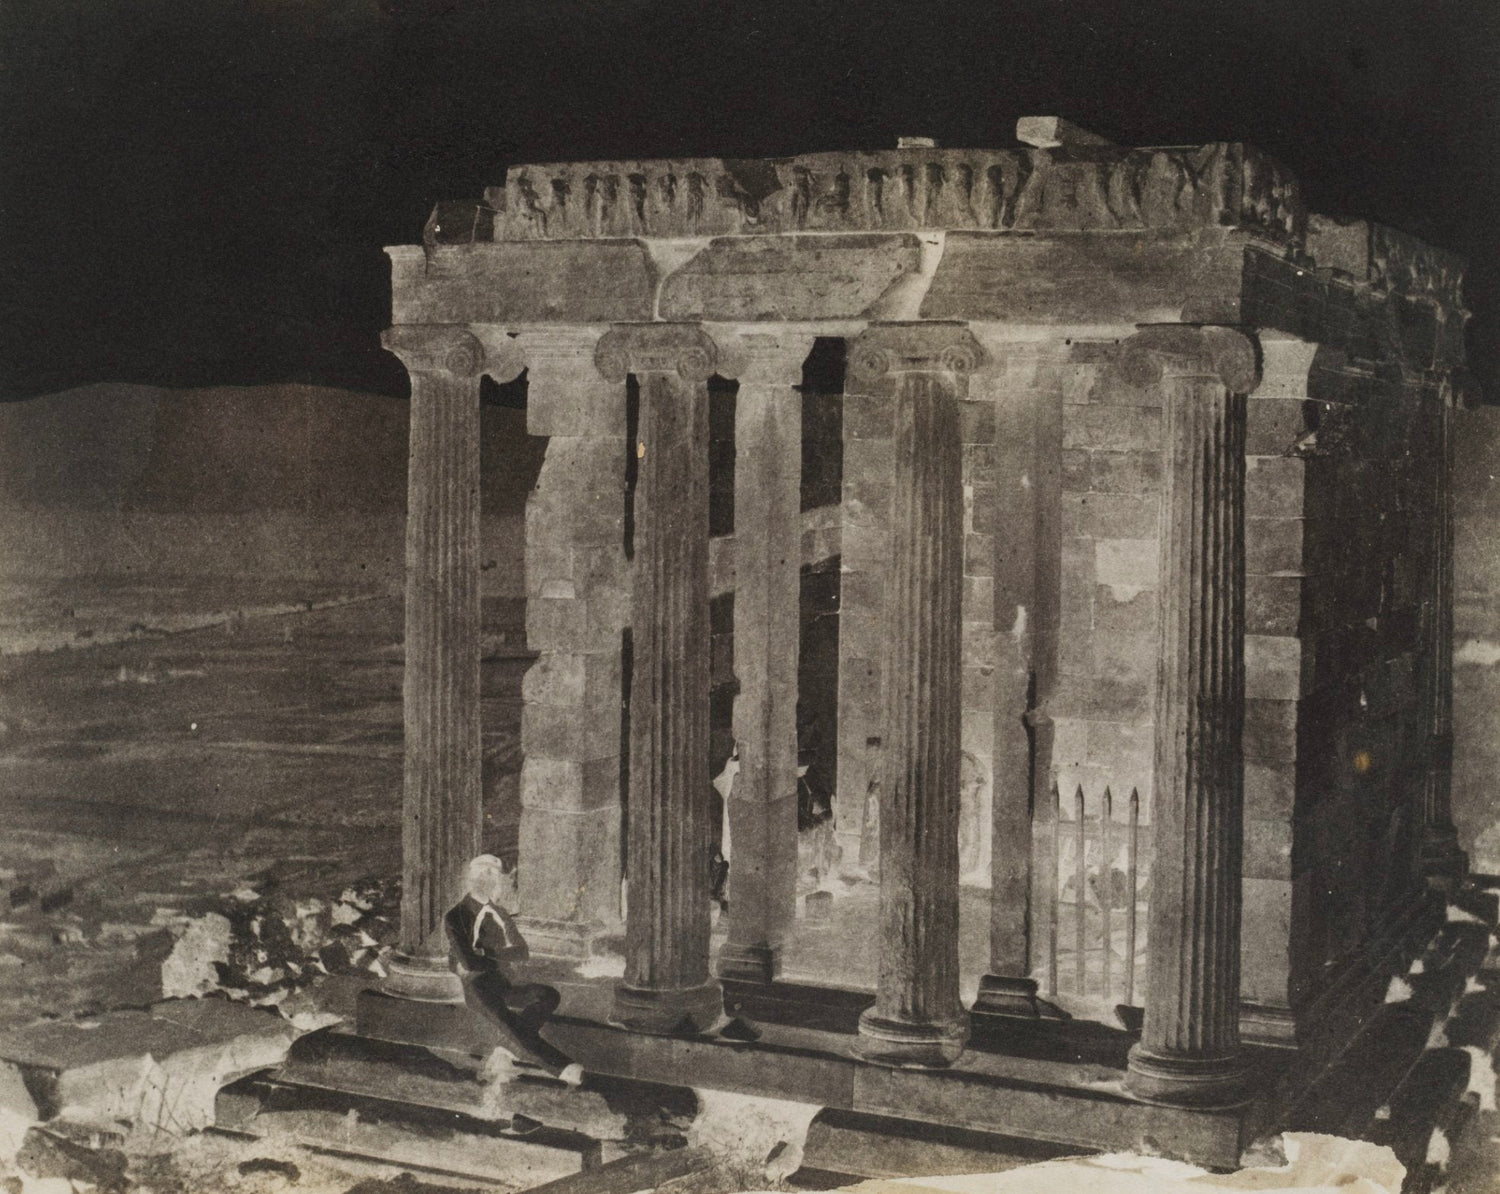 Photograph black and white of ruins with columns and a men sitting 